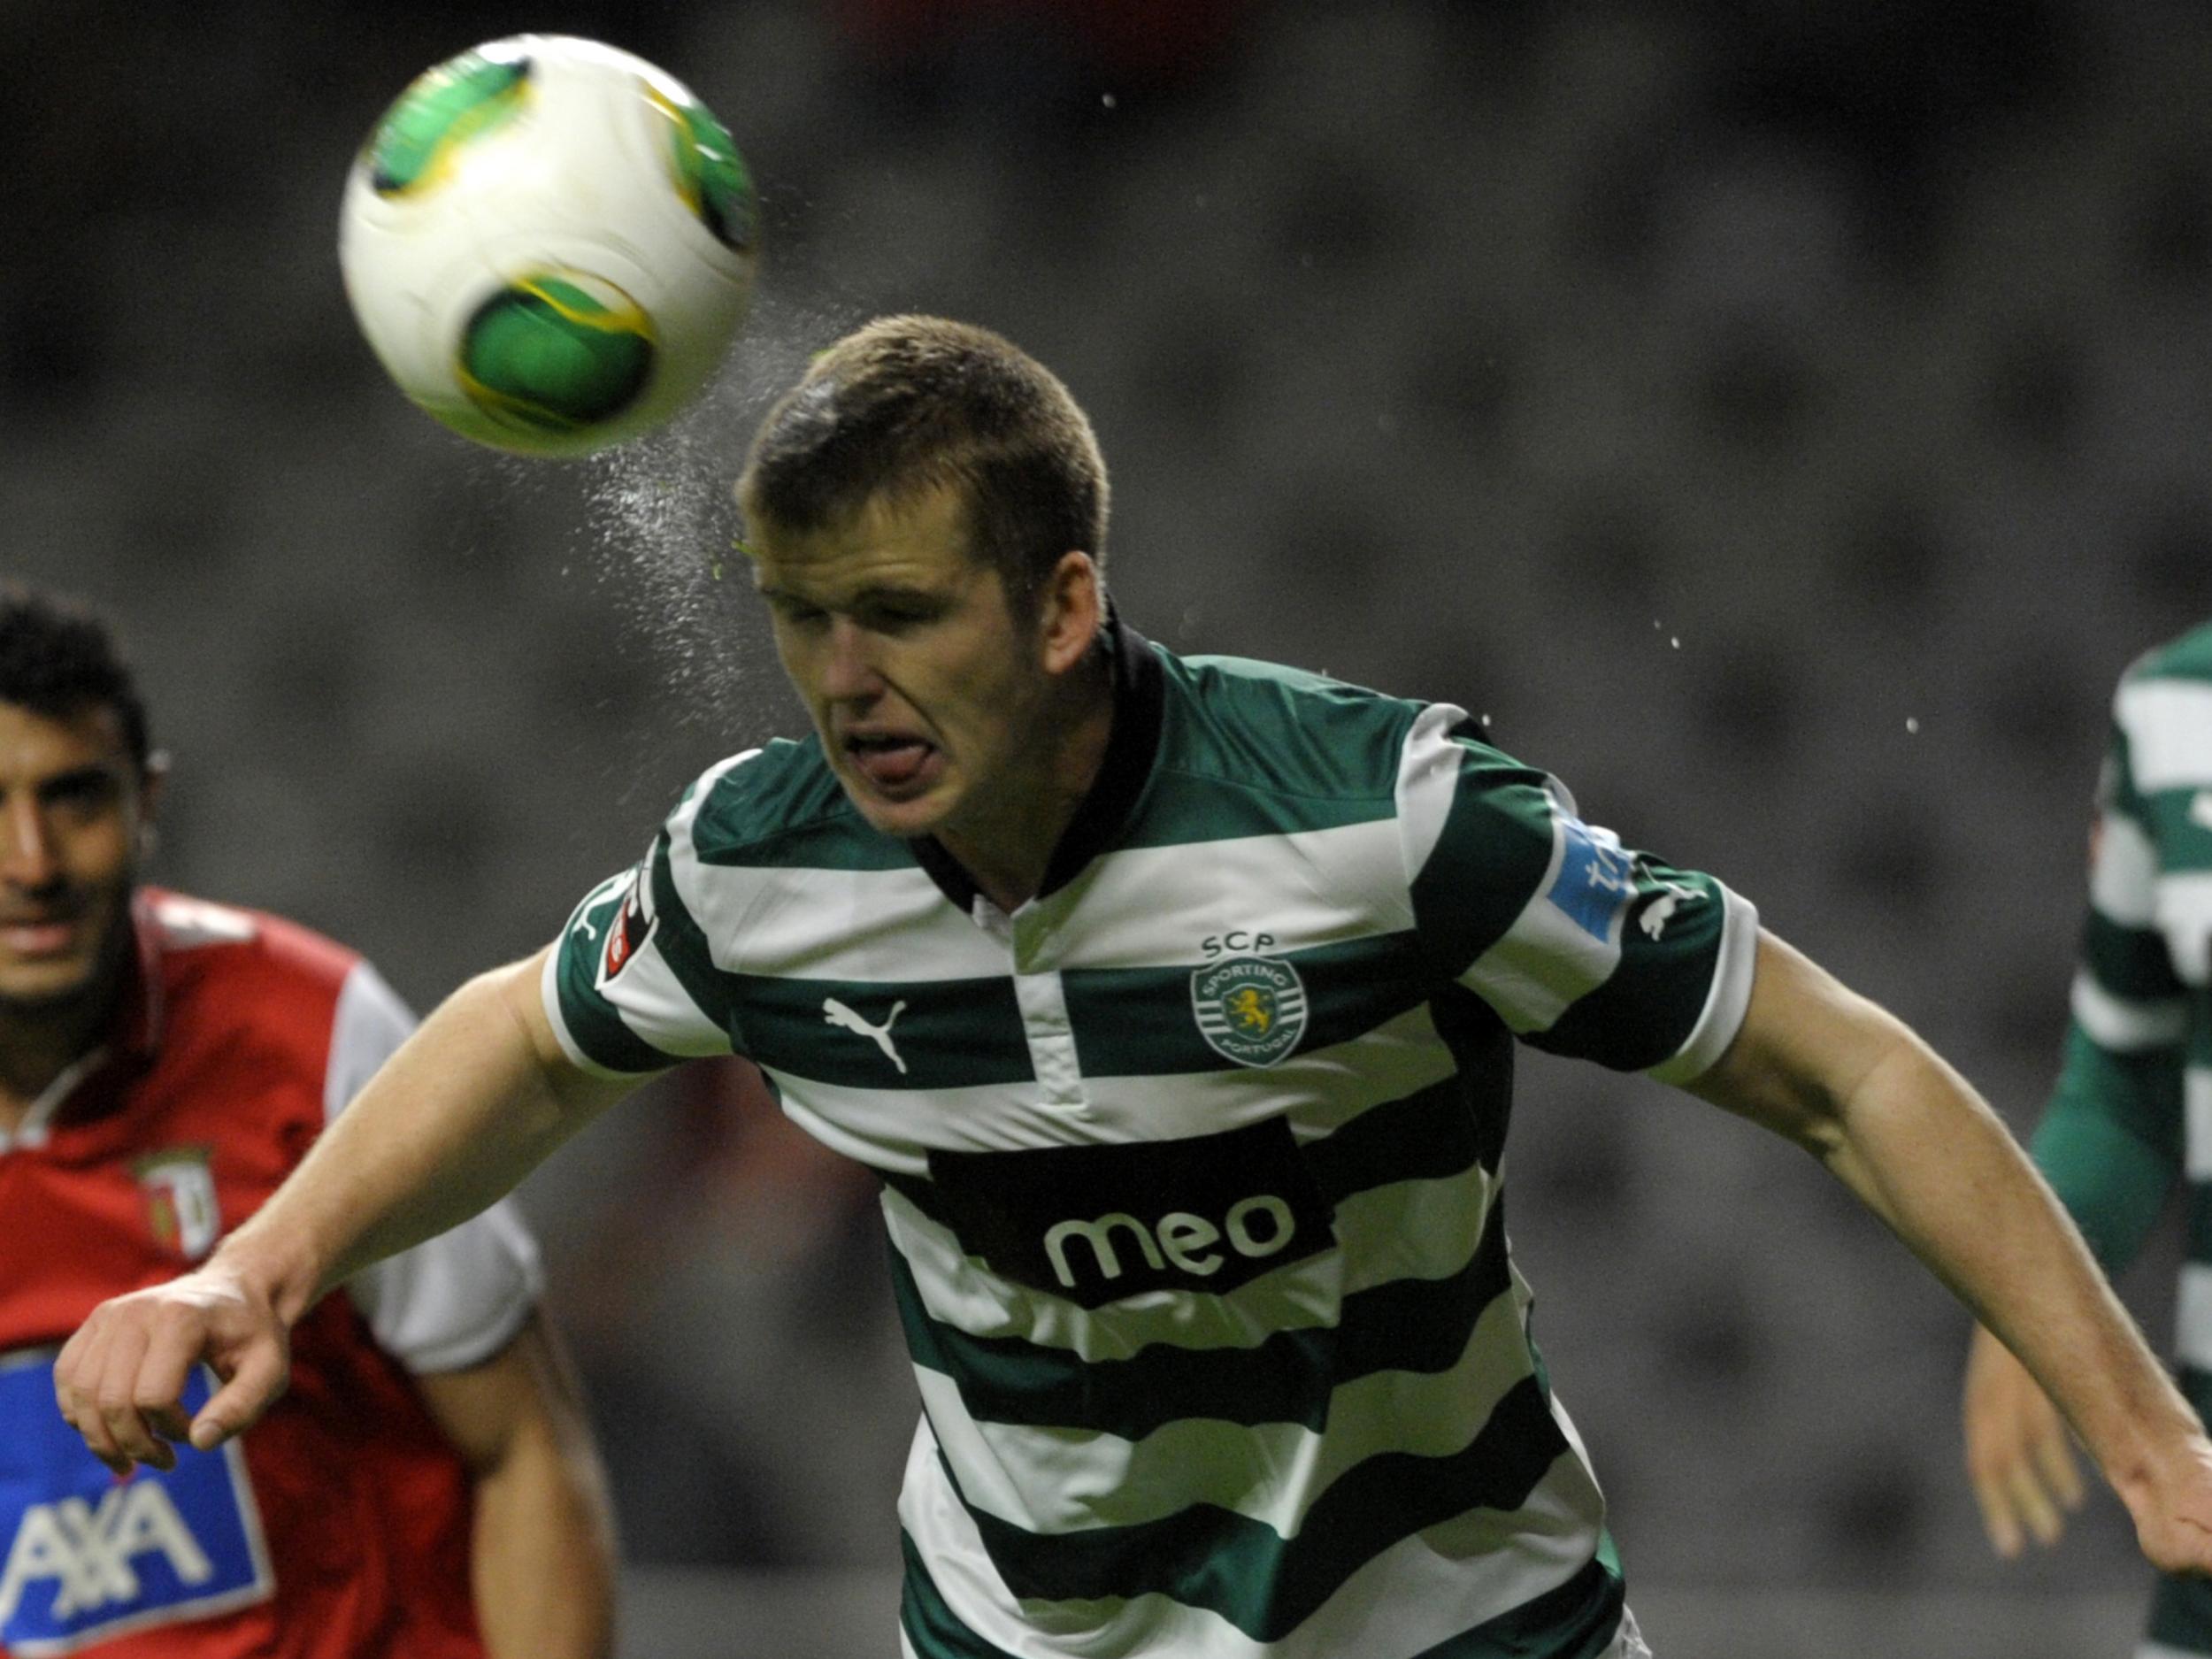 Dier grew up in Lisbon and played for Sporting